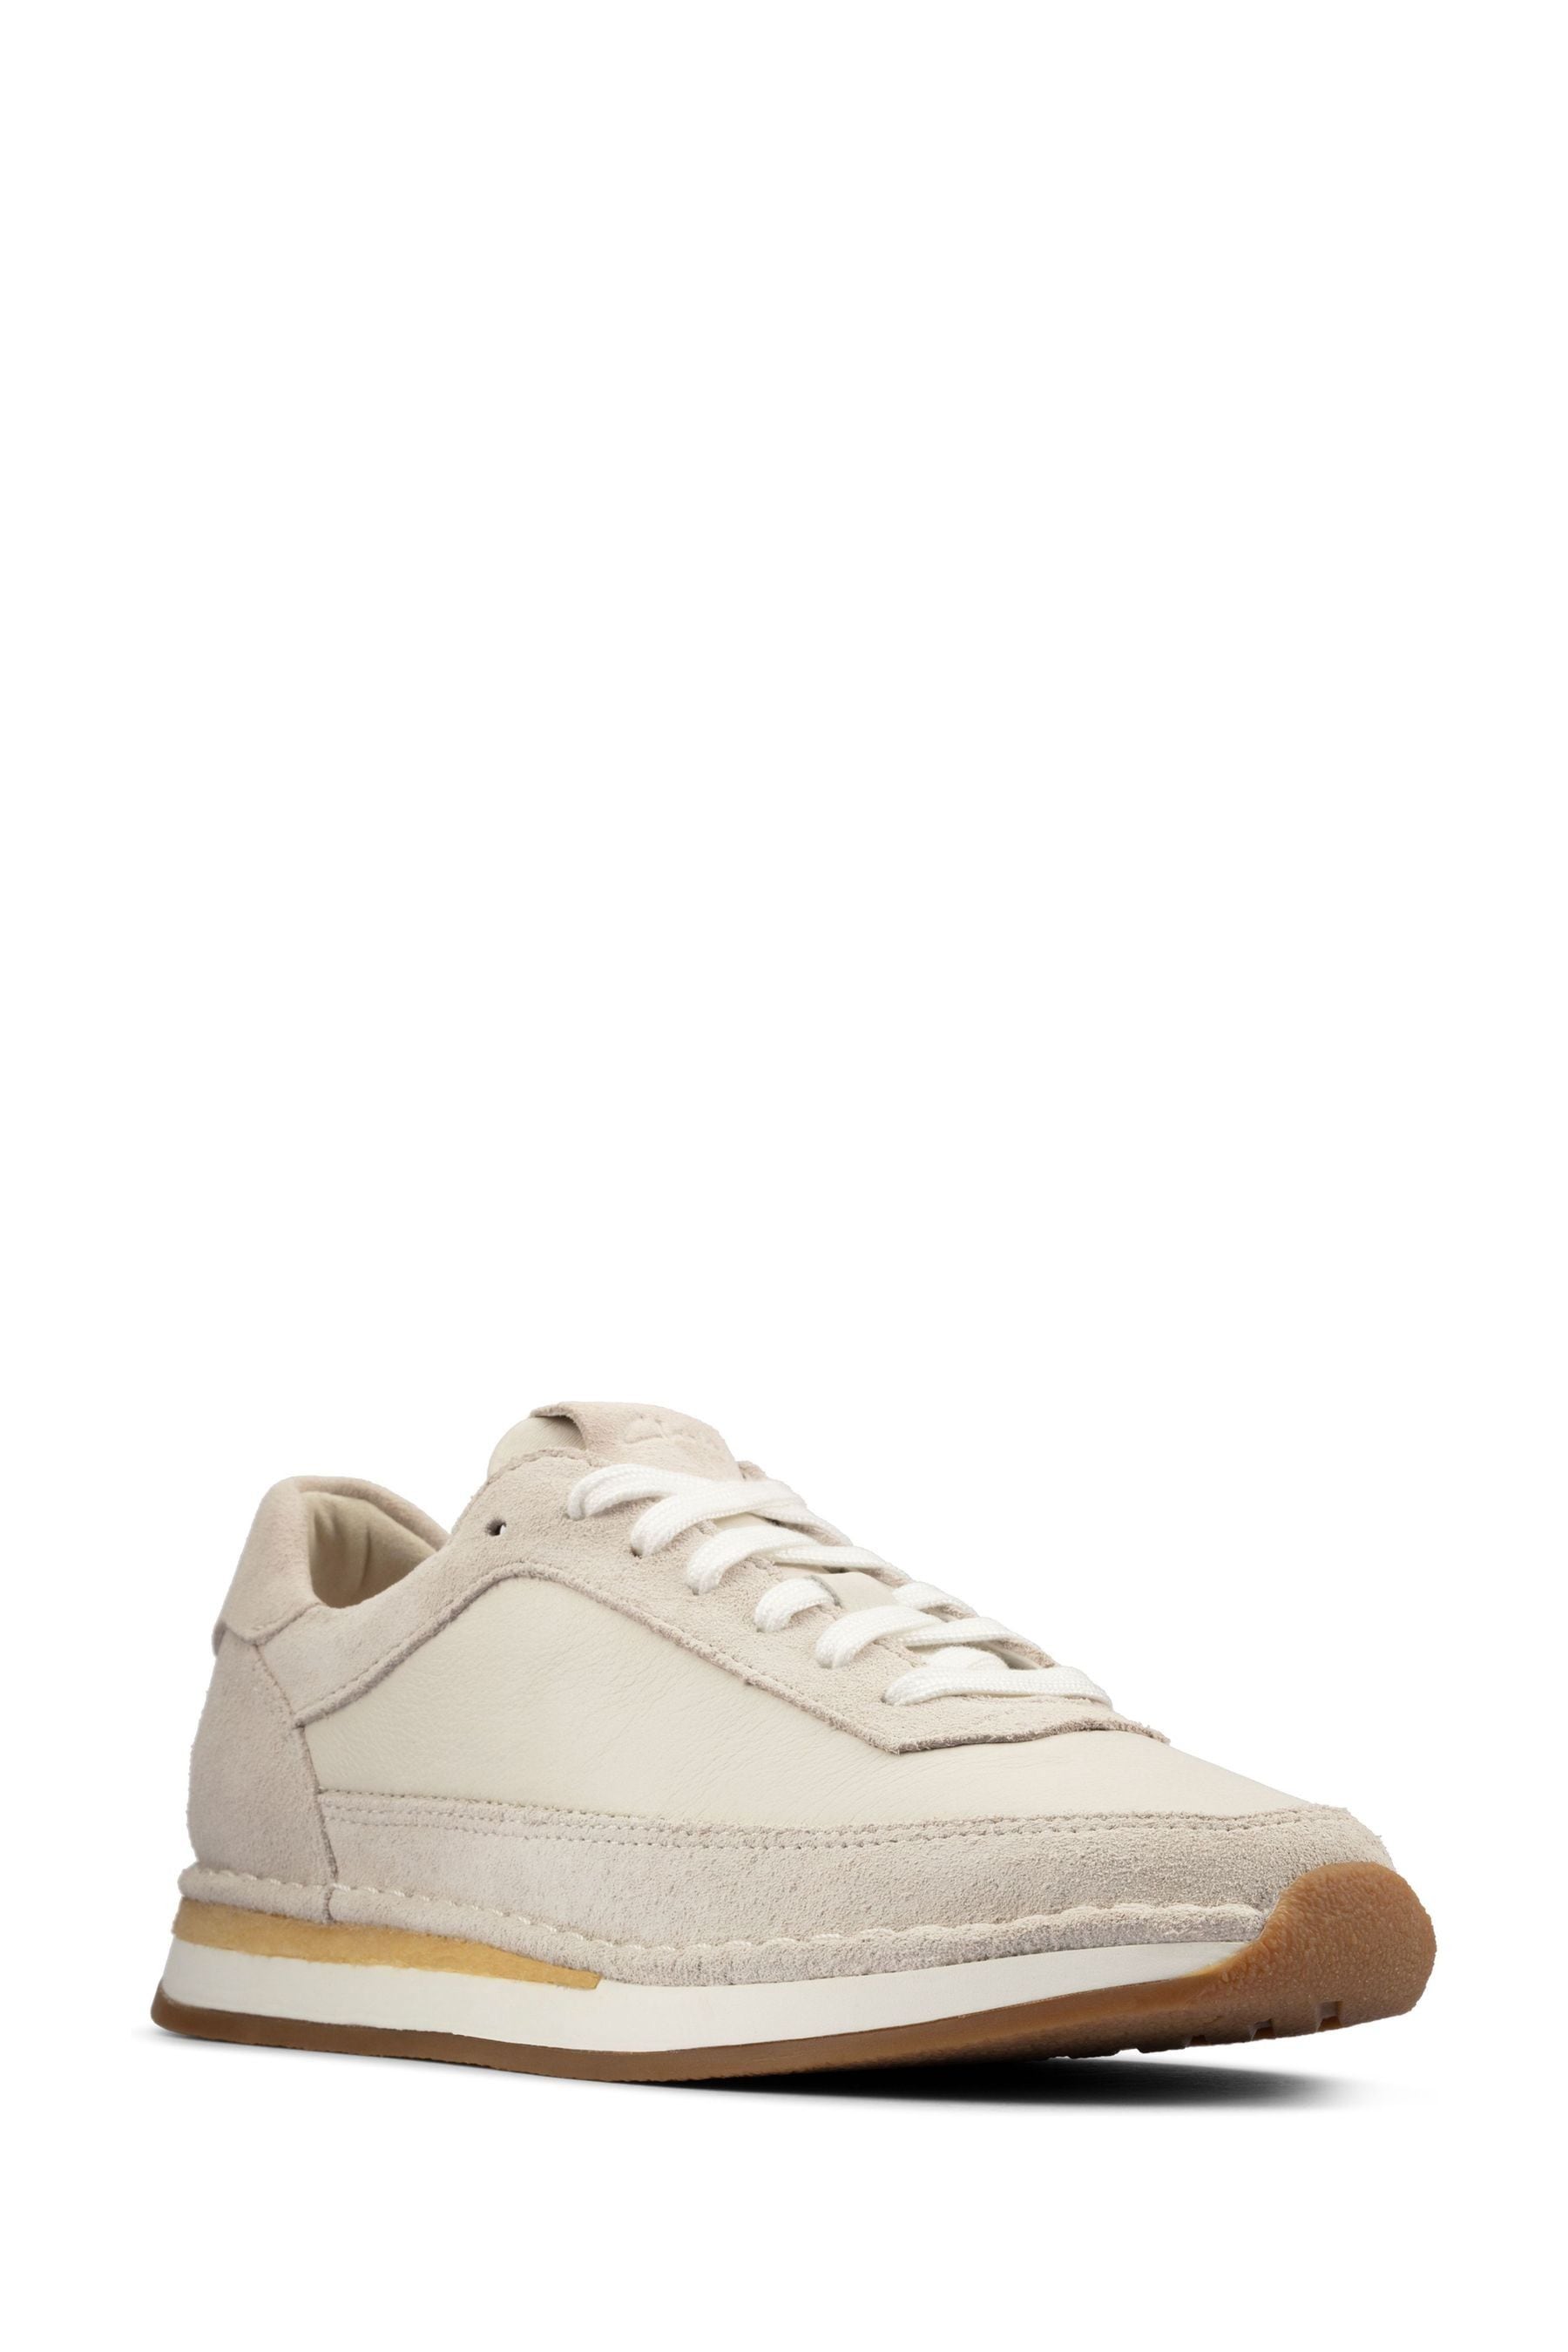 Buy Clarks White Suede Craftrun Lace Trainers from the Next UK online shop